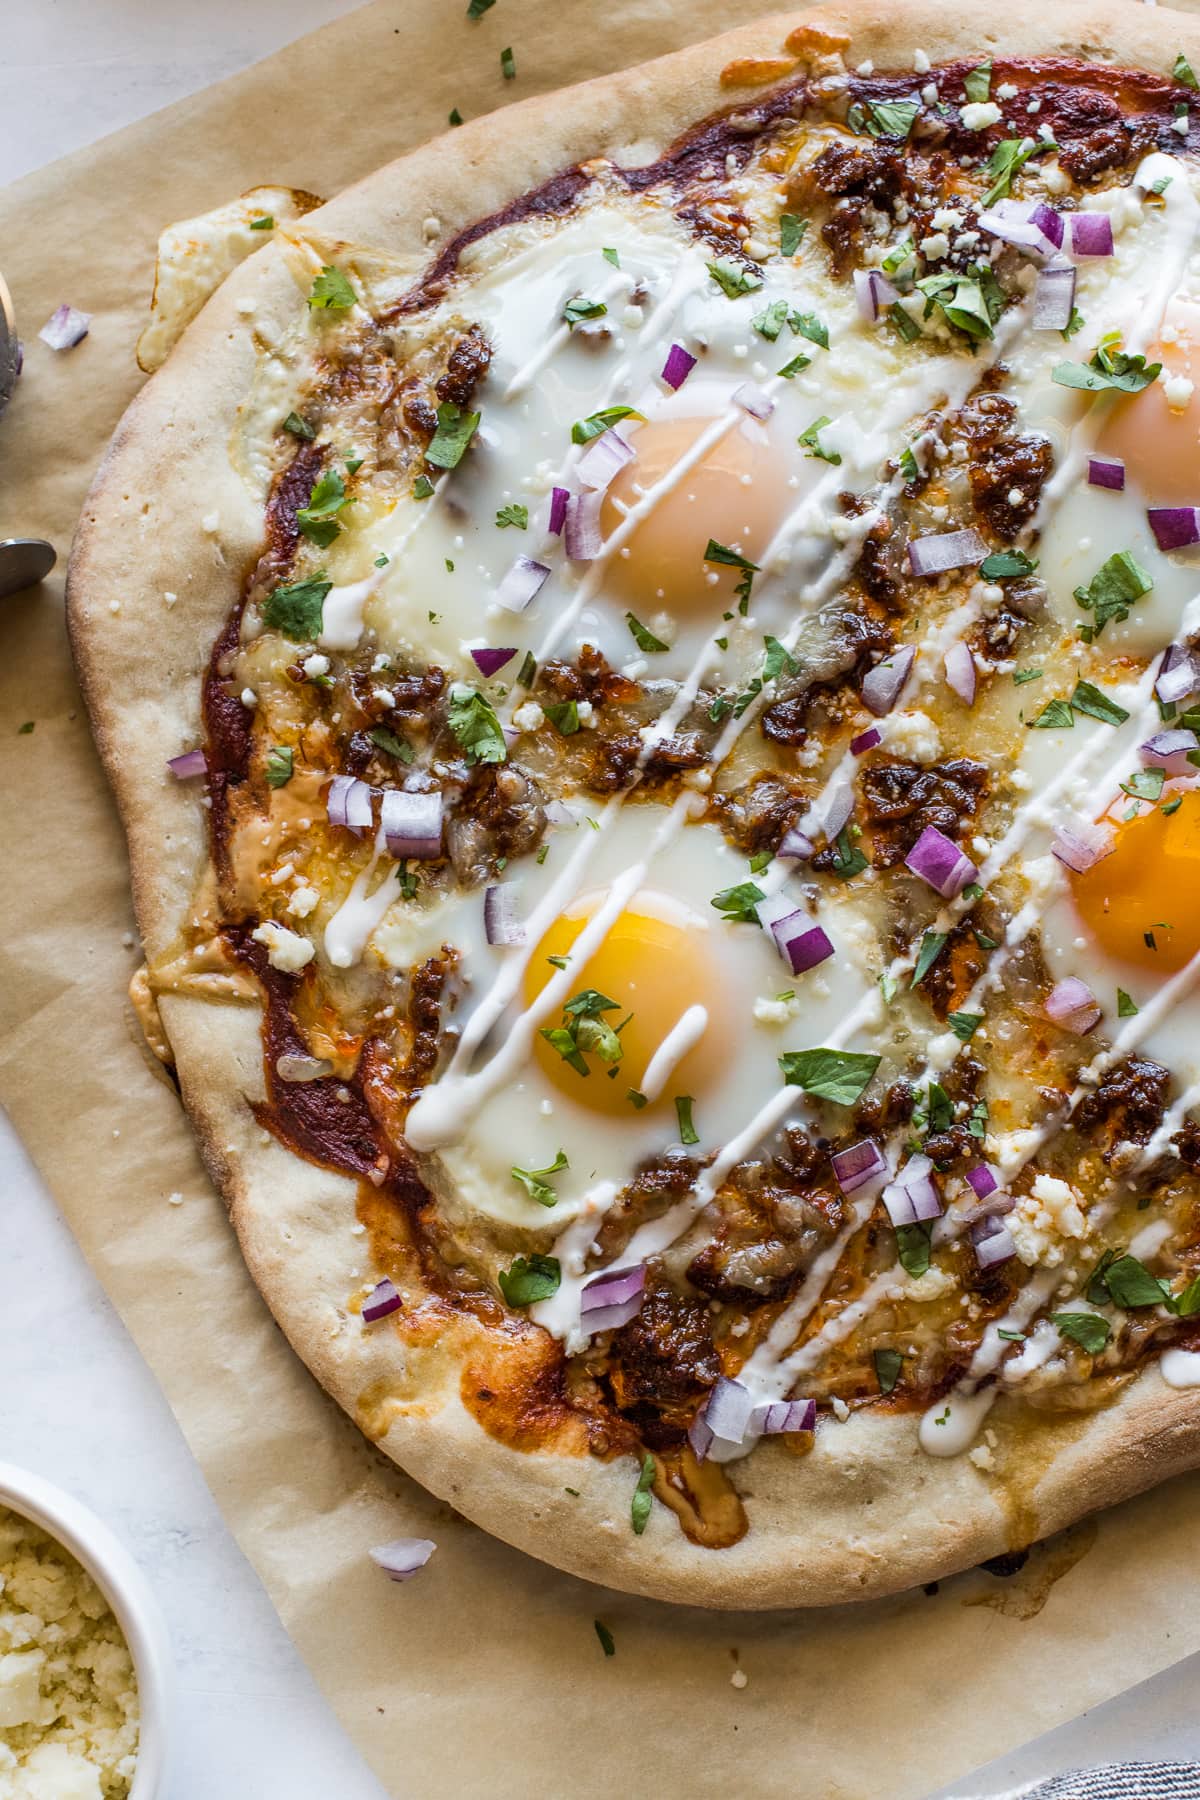 Breakfast pizza topped with sour cream, onions, and cilantro.